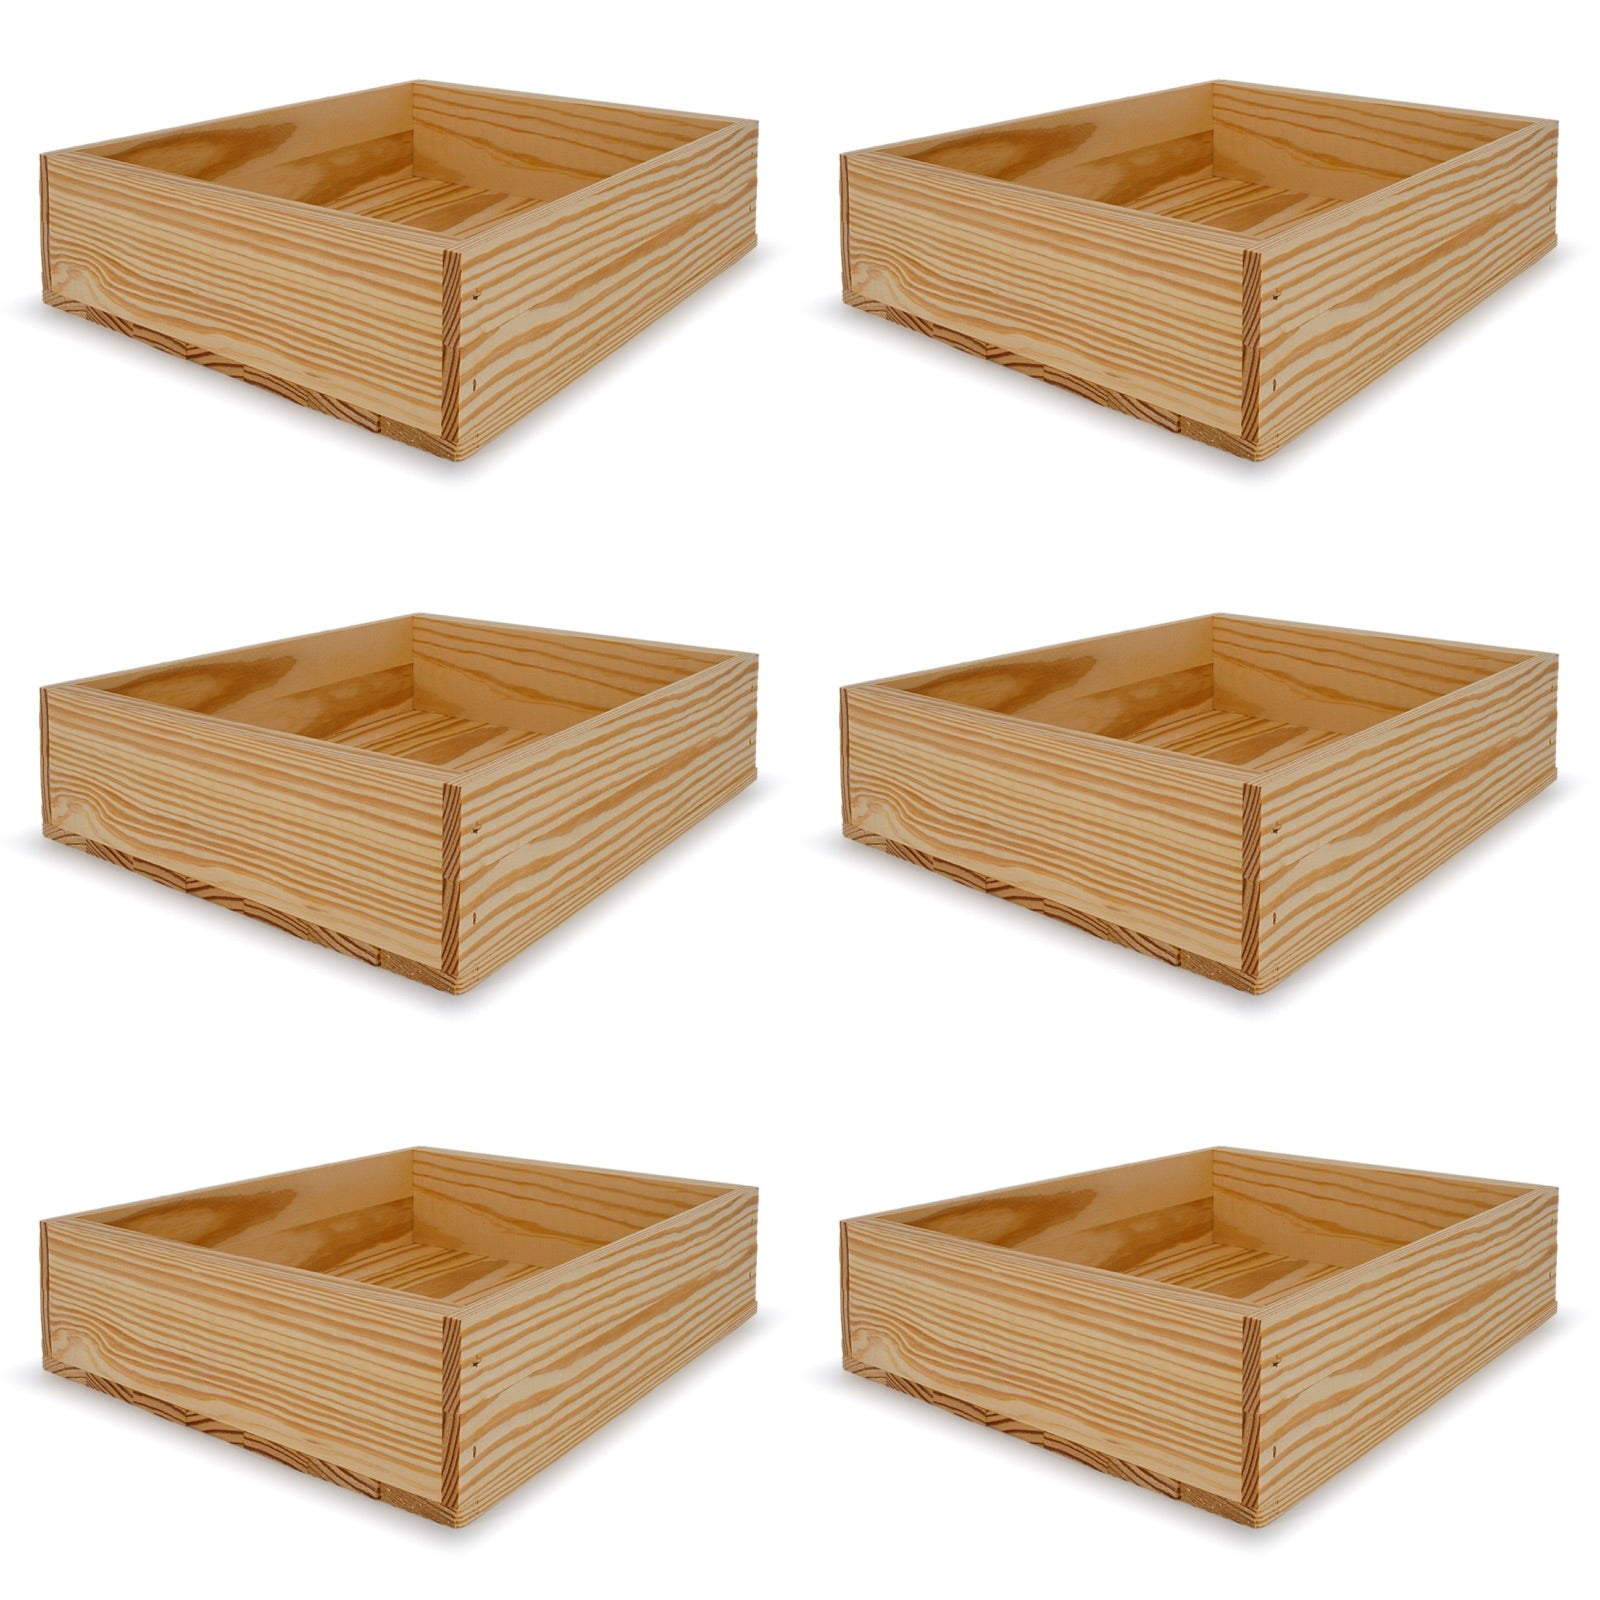 6 Small wooden crates 14x11.5x3.5